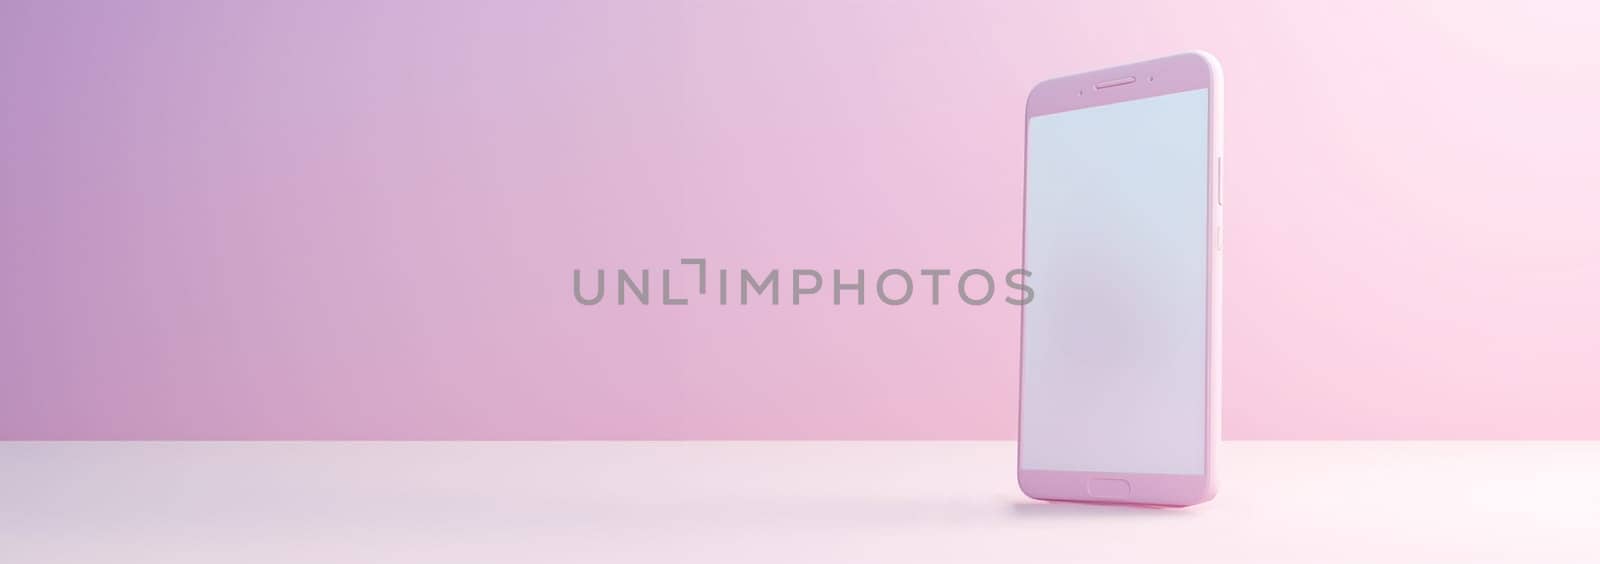 Minimalist modern clay mockup smartphones for presentation, application display, information graphics etc. EPS. 3D pastel pink Copy space smartphone mobile concept by Annebel146